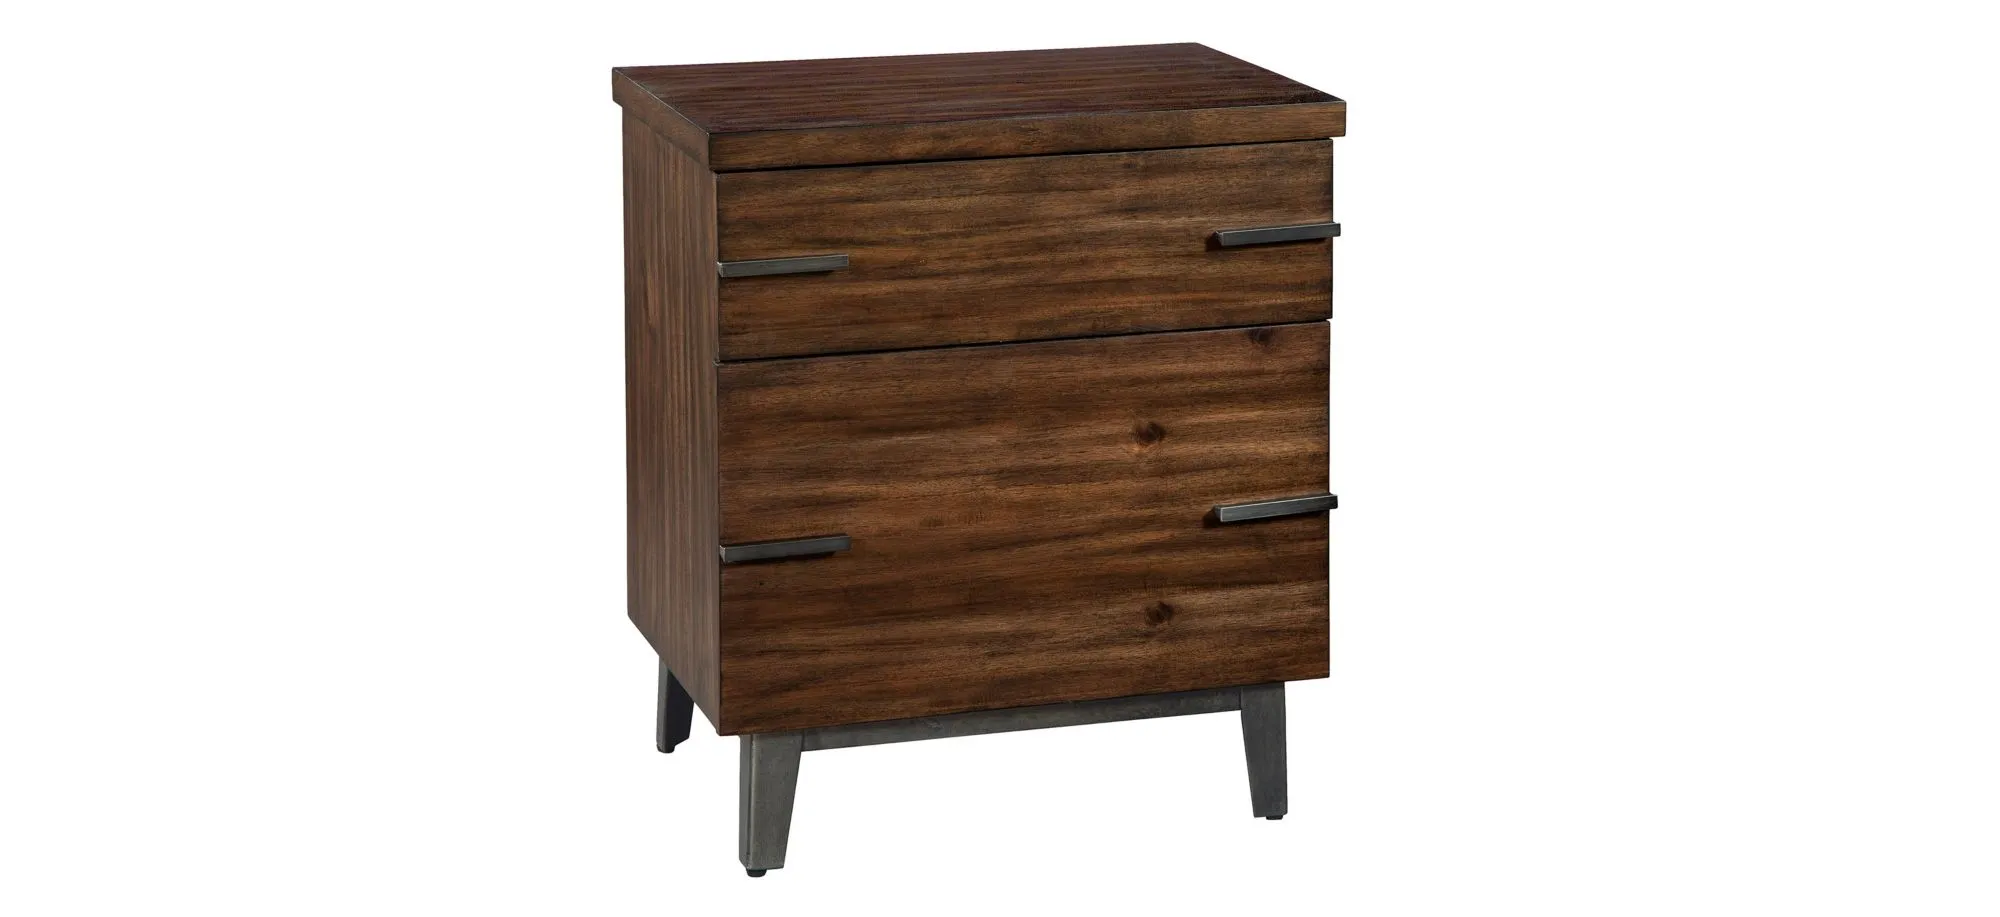 Monterey Point File Cabinet in MONTEREY POINT by Hekman Furniture Company